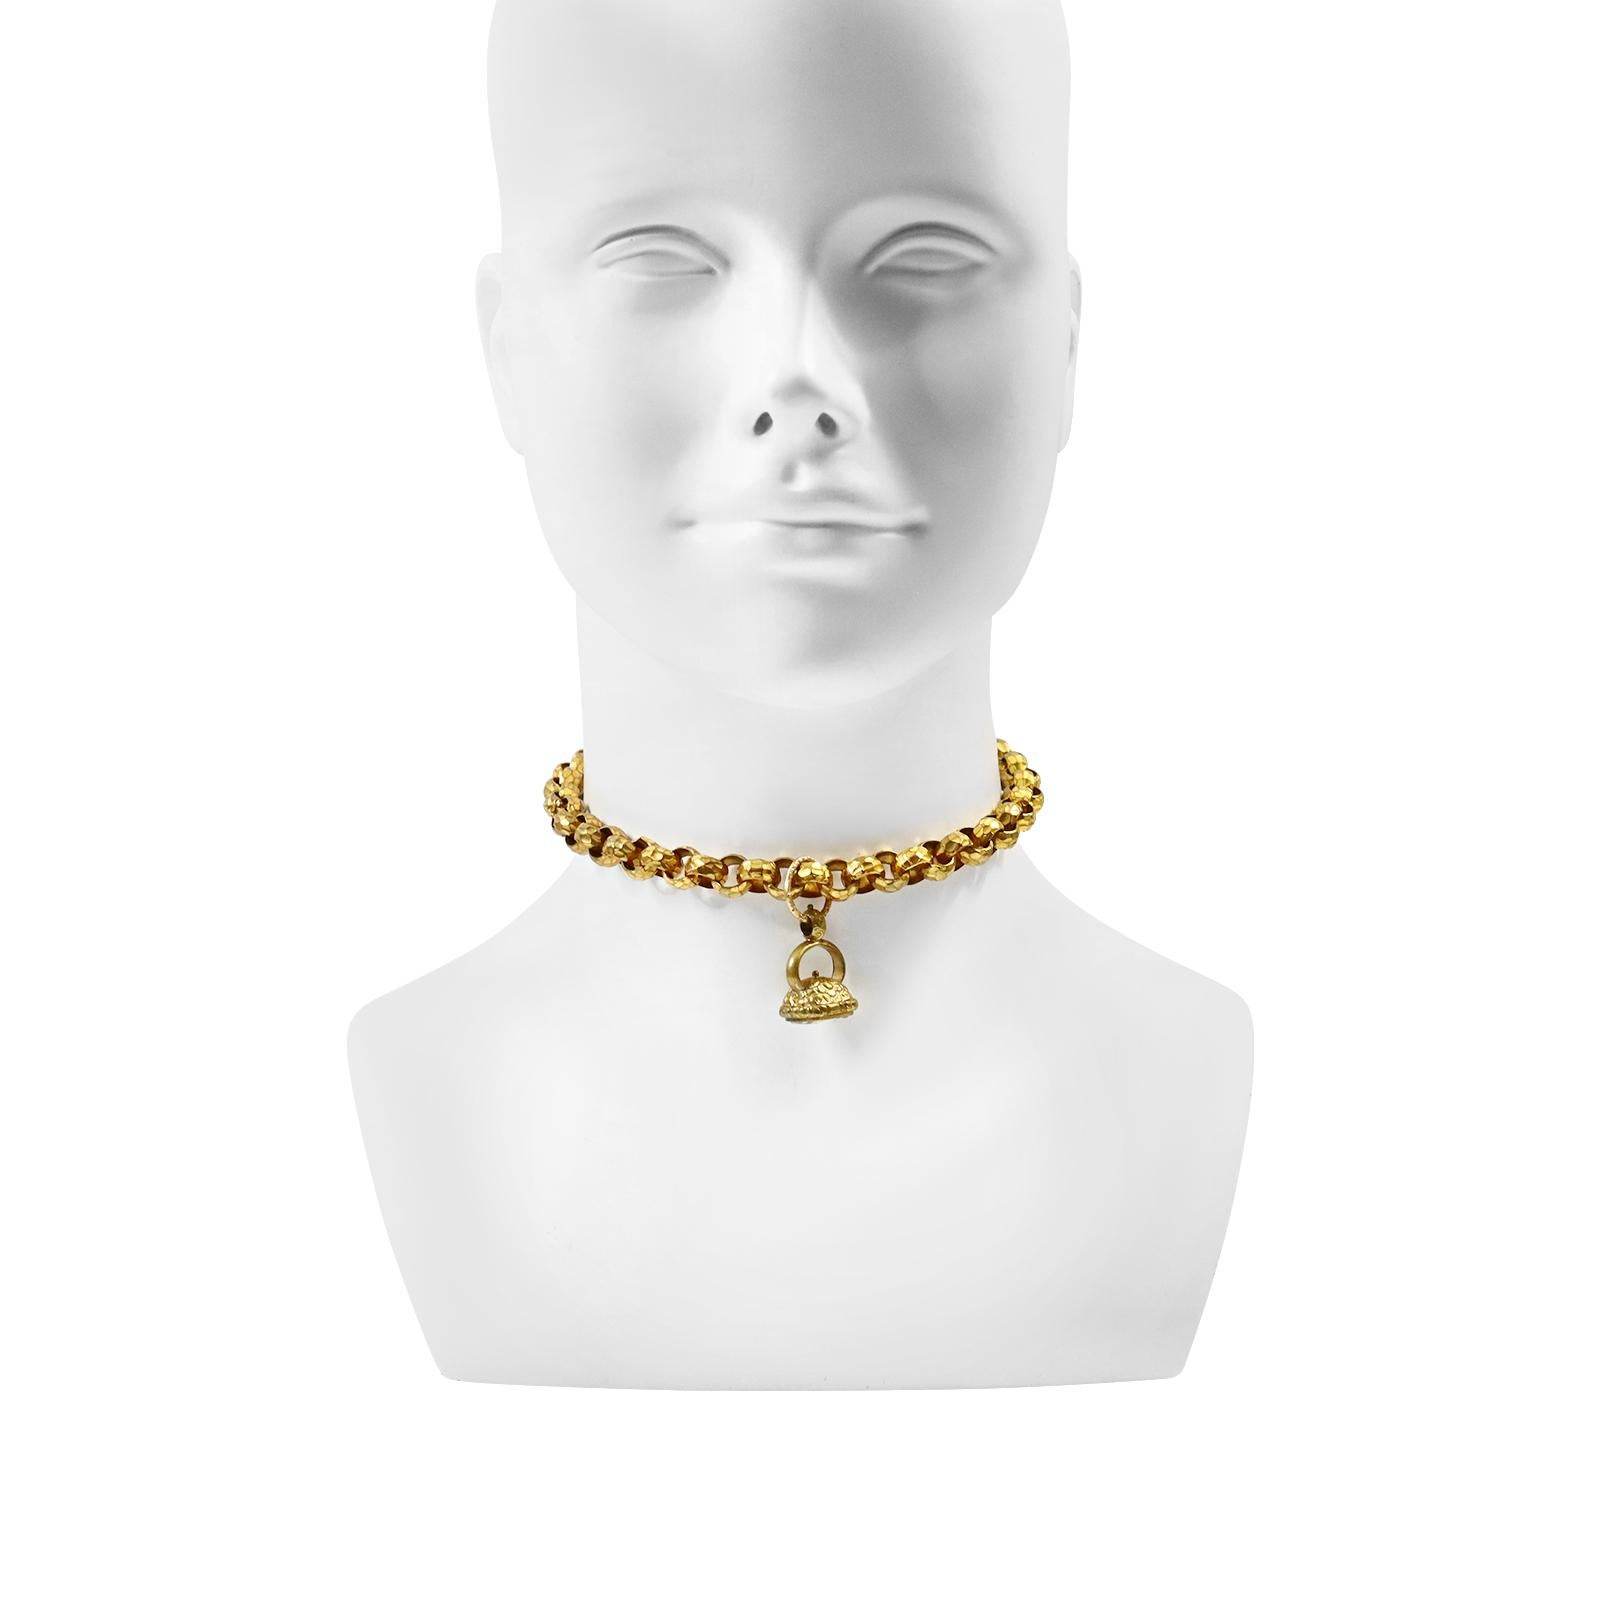 Vintage Hammered Gold Tone Round Link Choker with Victorian Fob Circa 1900s In Good Condition For Sale In New York, NY